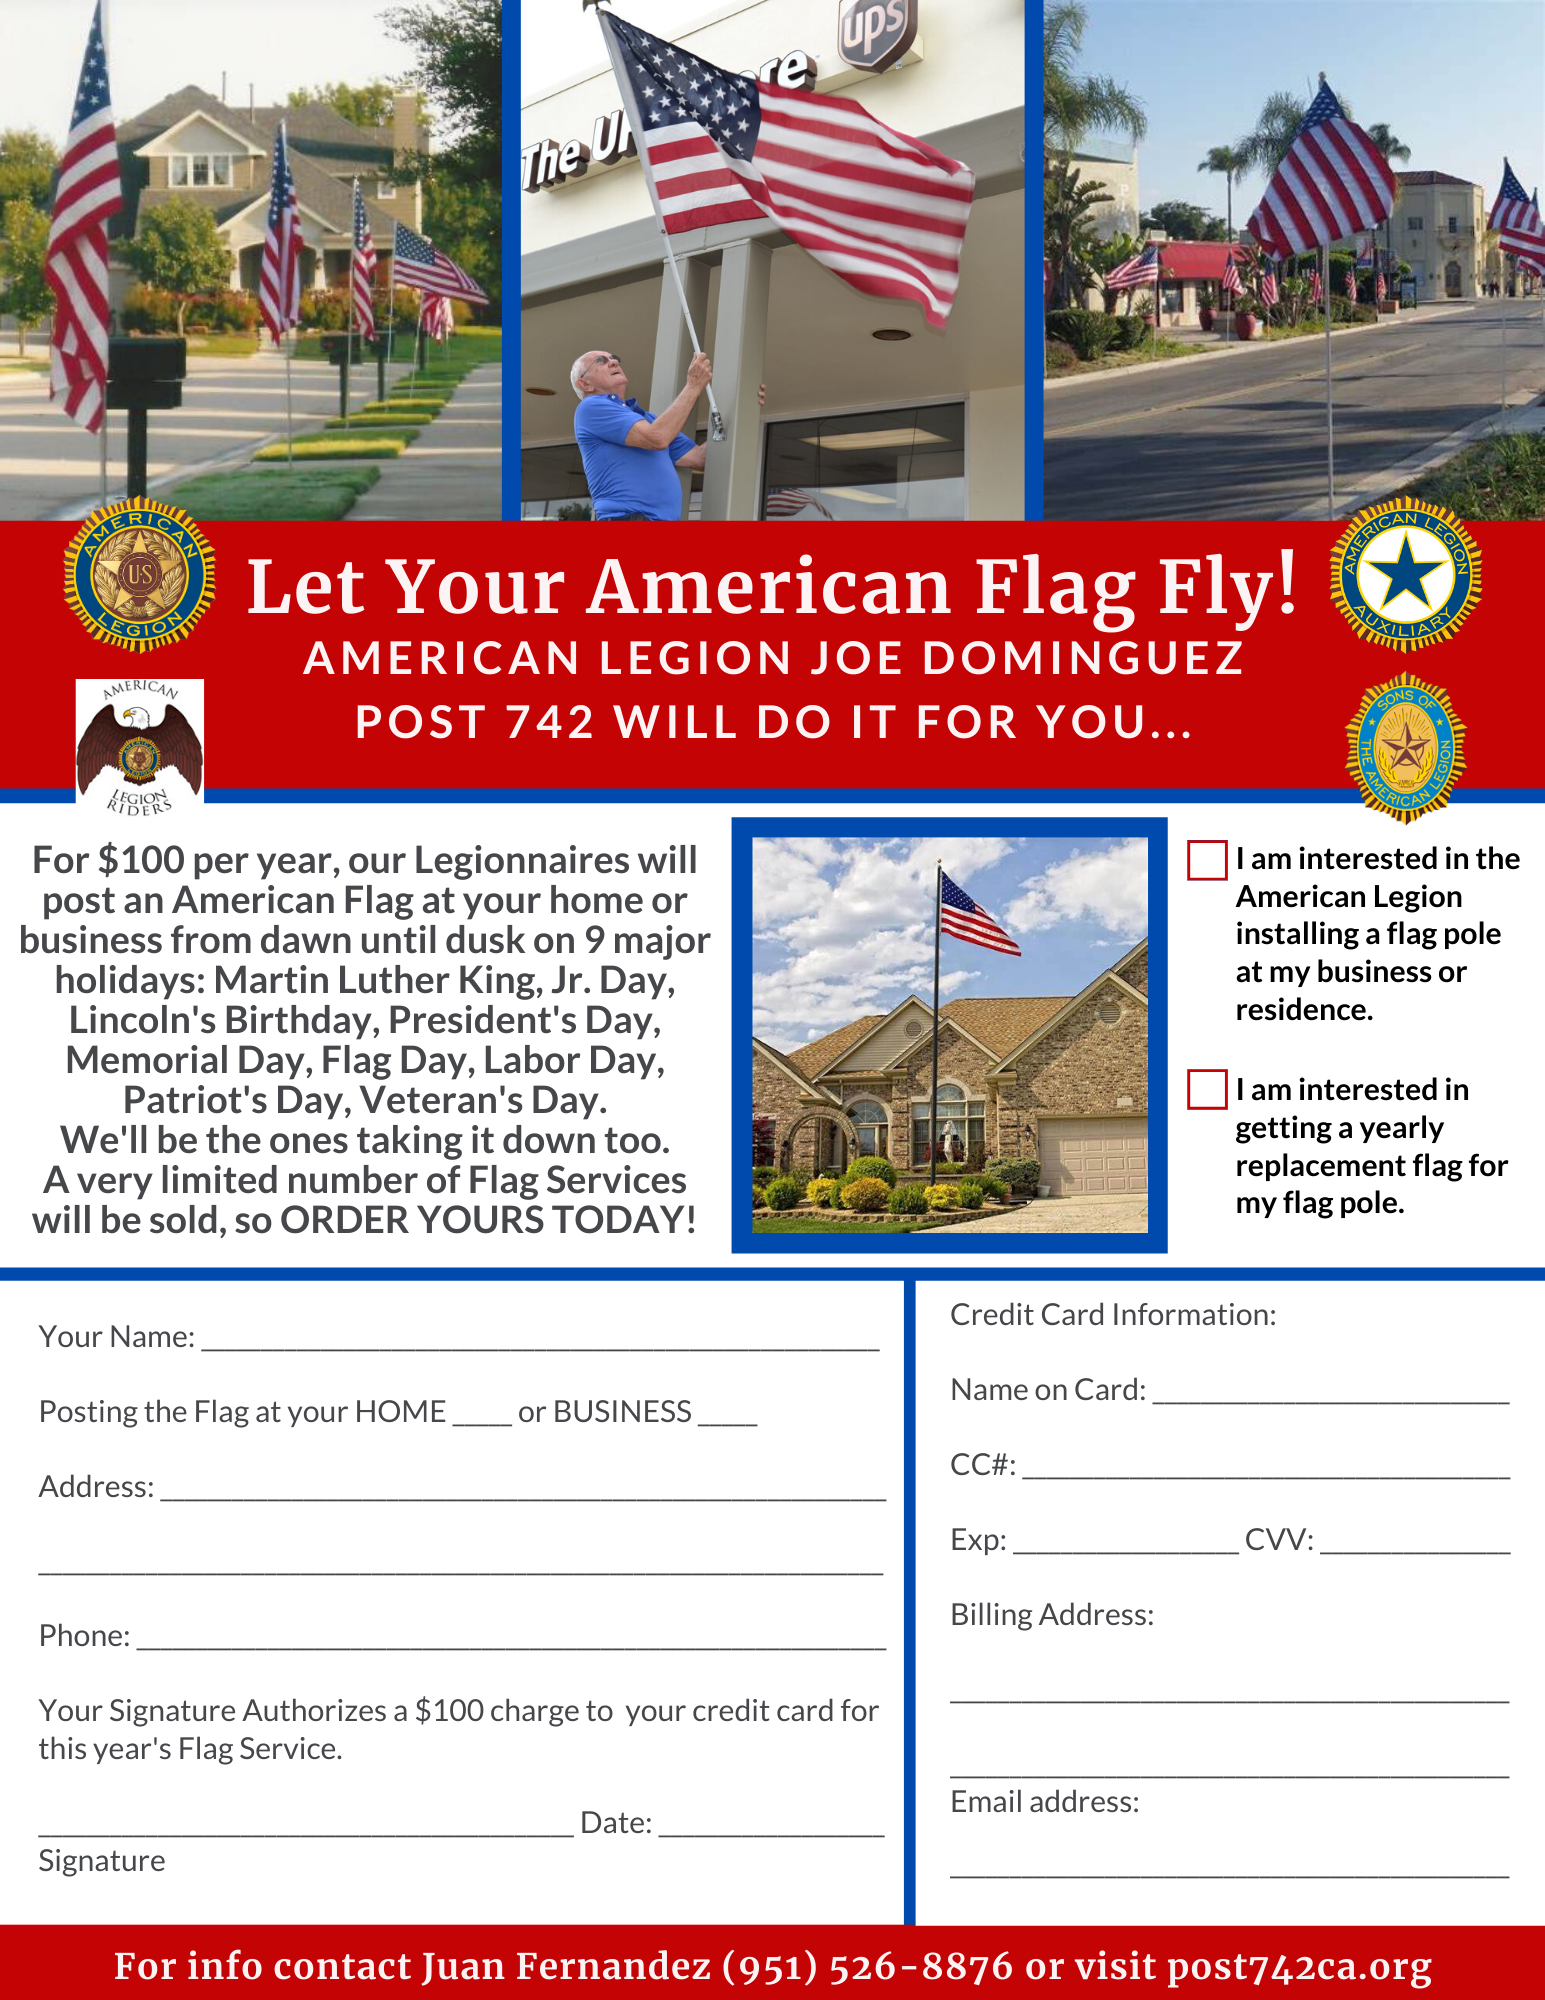 Let Your Americanism Fly!